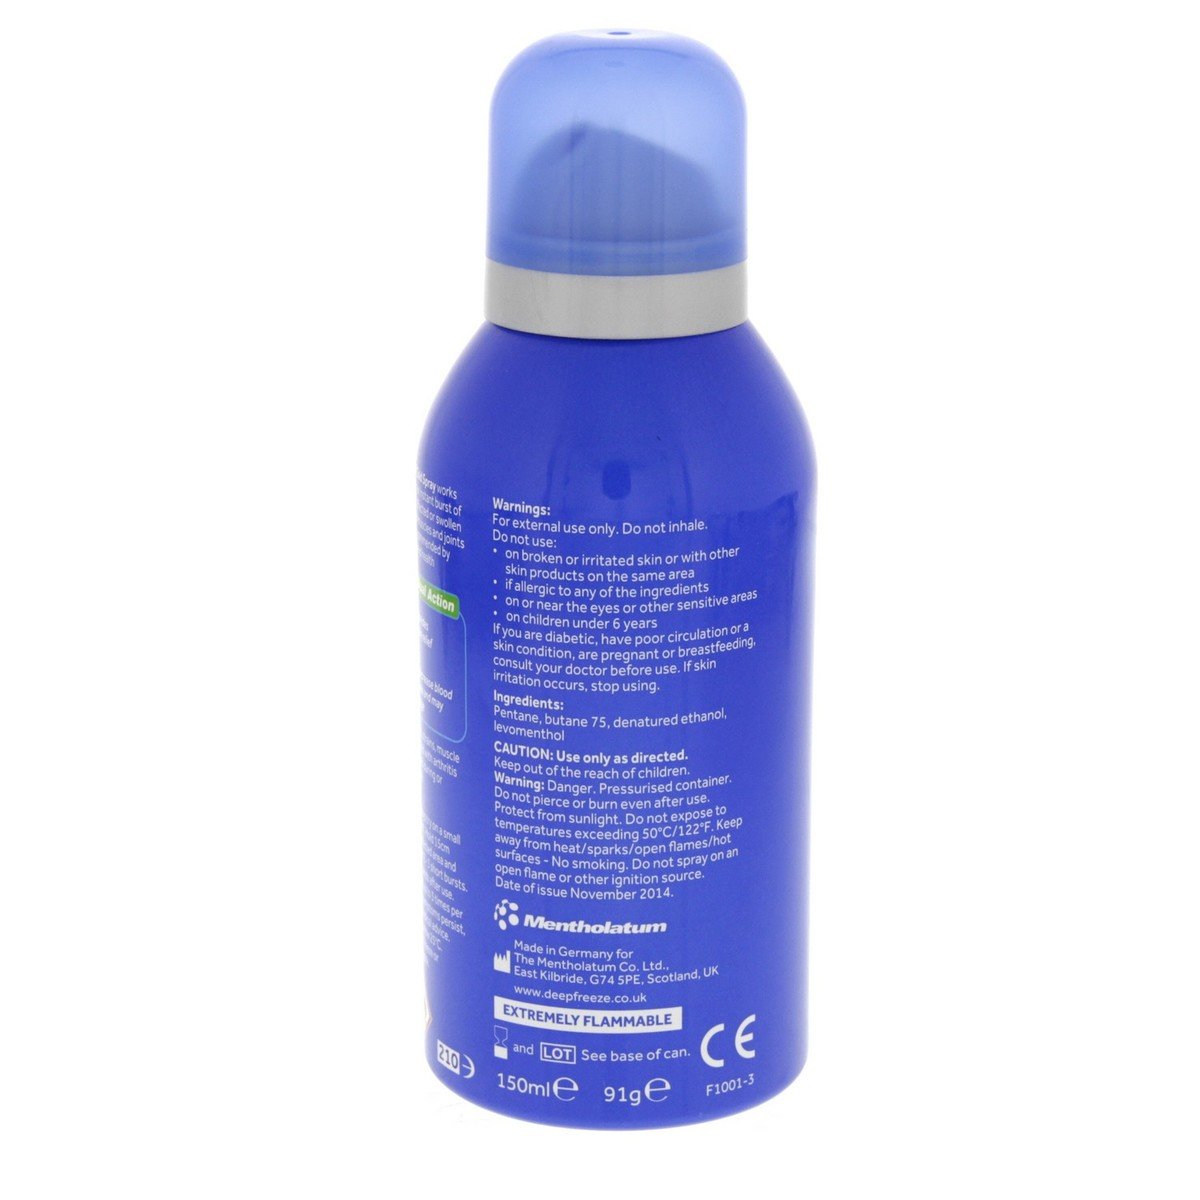 Deep Freeze Pain Relief Cold Spray, 150 ml